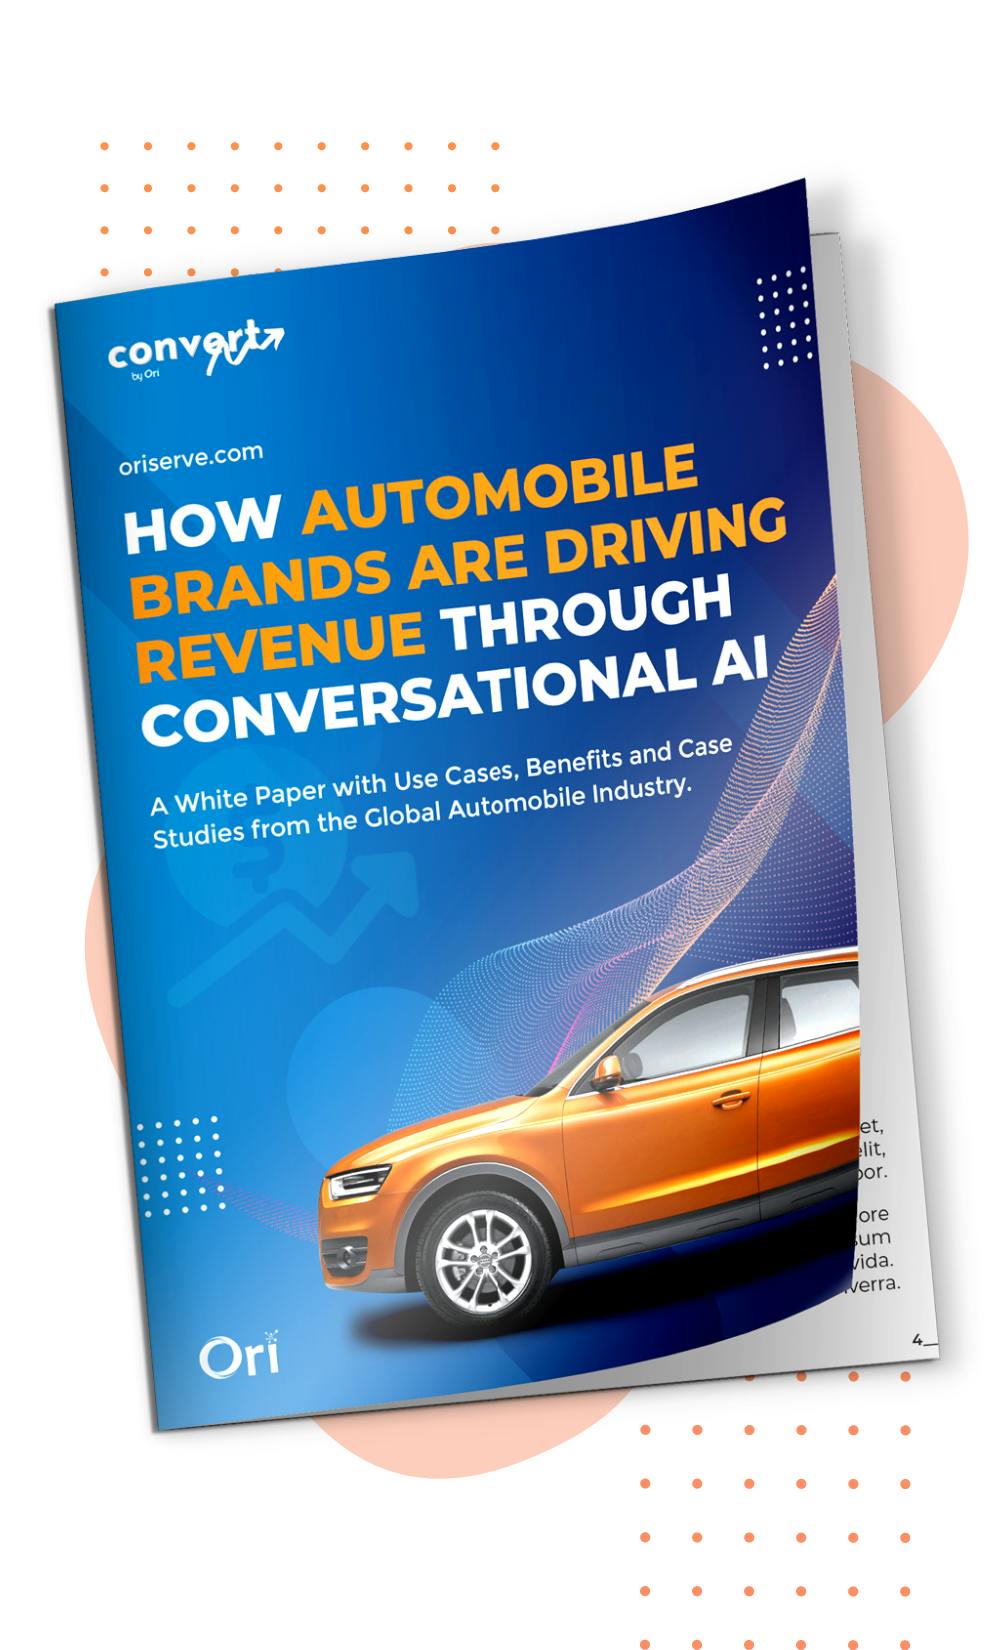 A whitepaper on how Auto brands are using Conversational AI